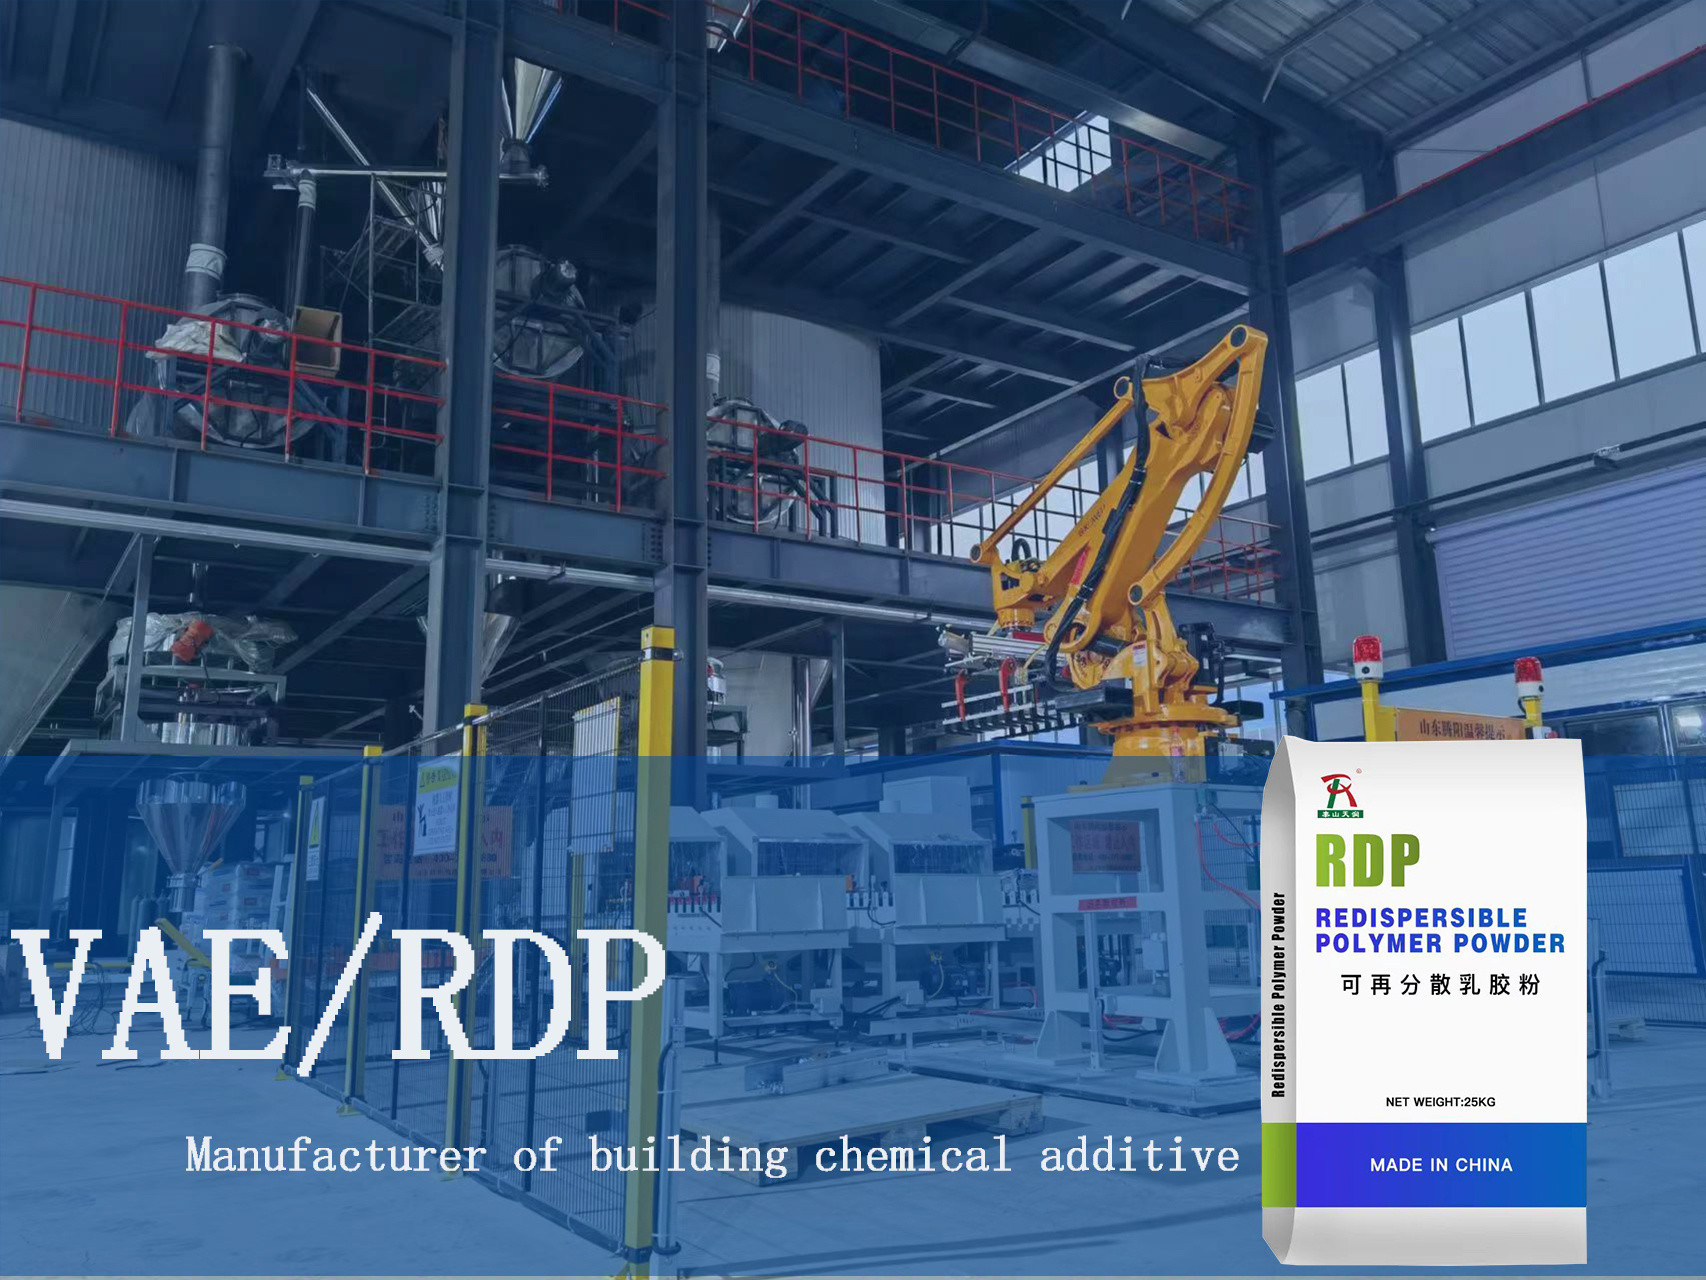 The role of redispersible polymer powder